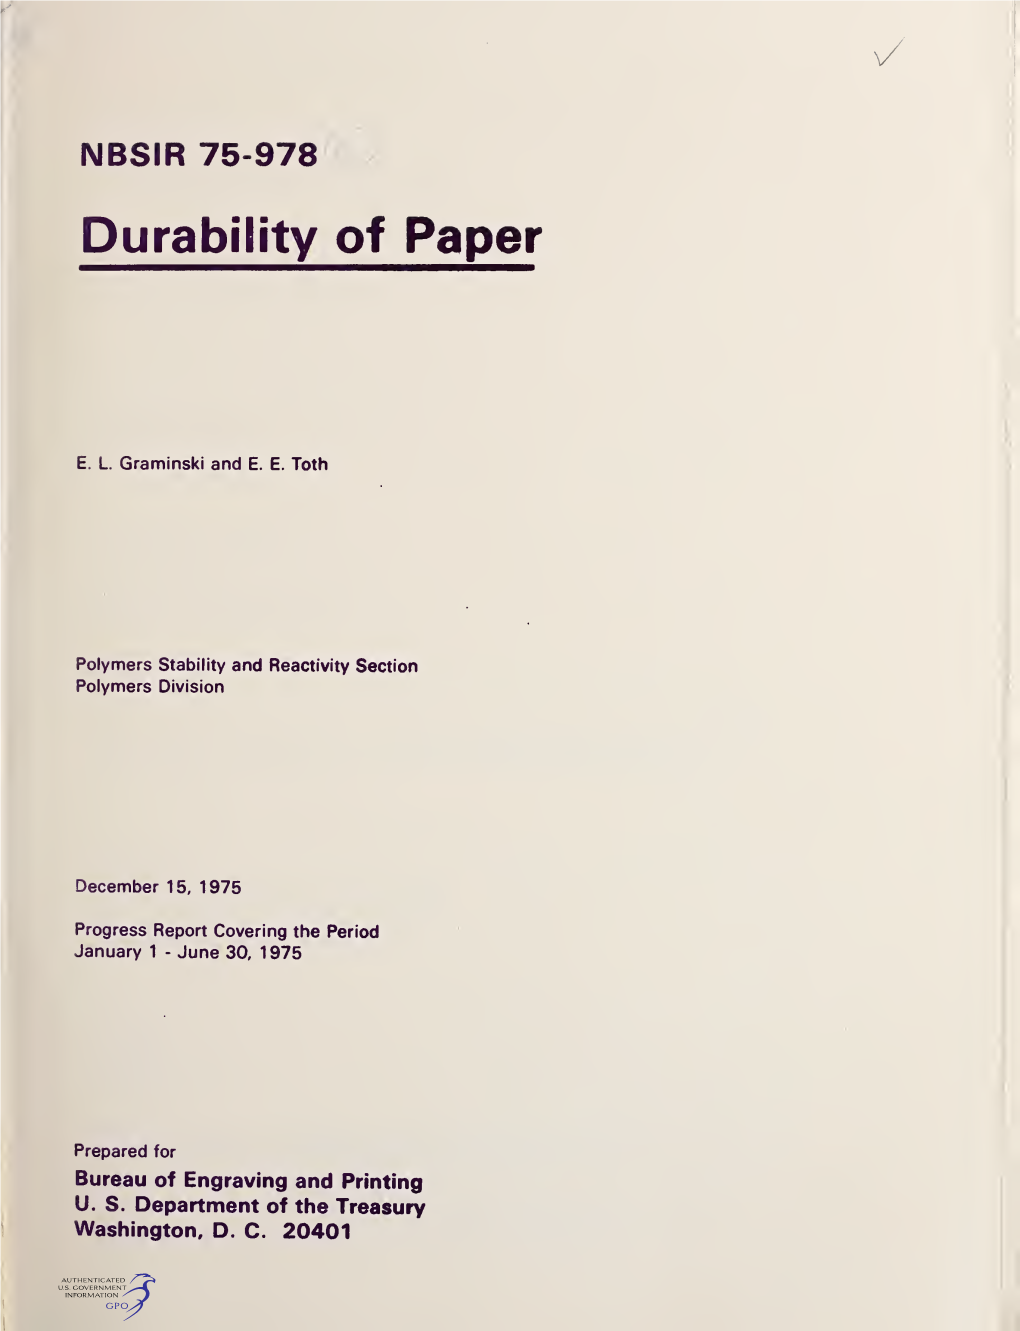 Durability of Paper